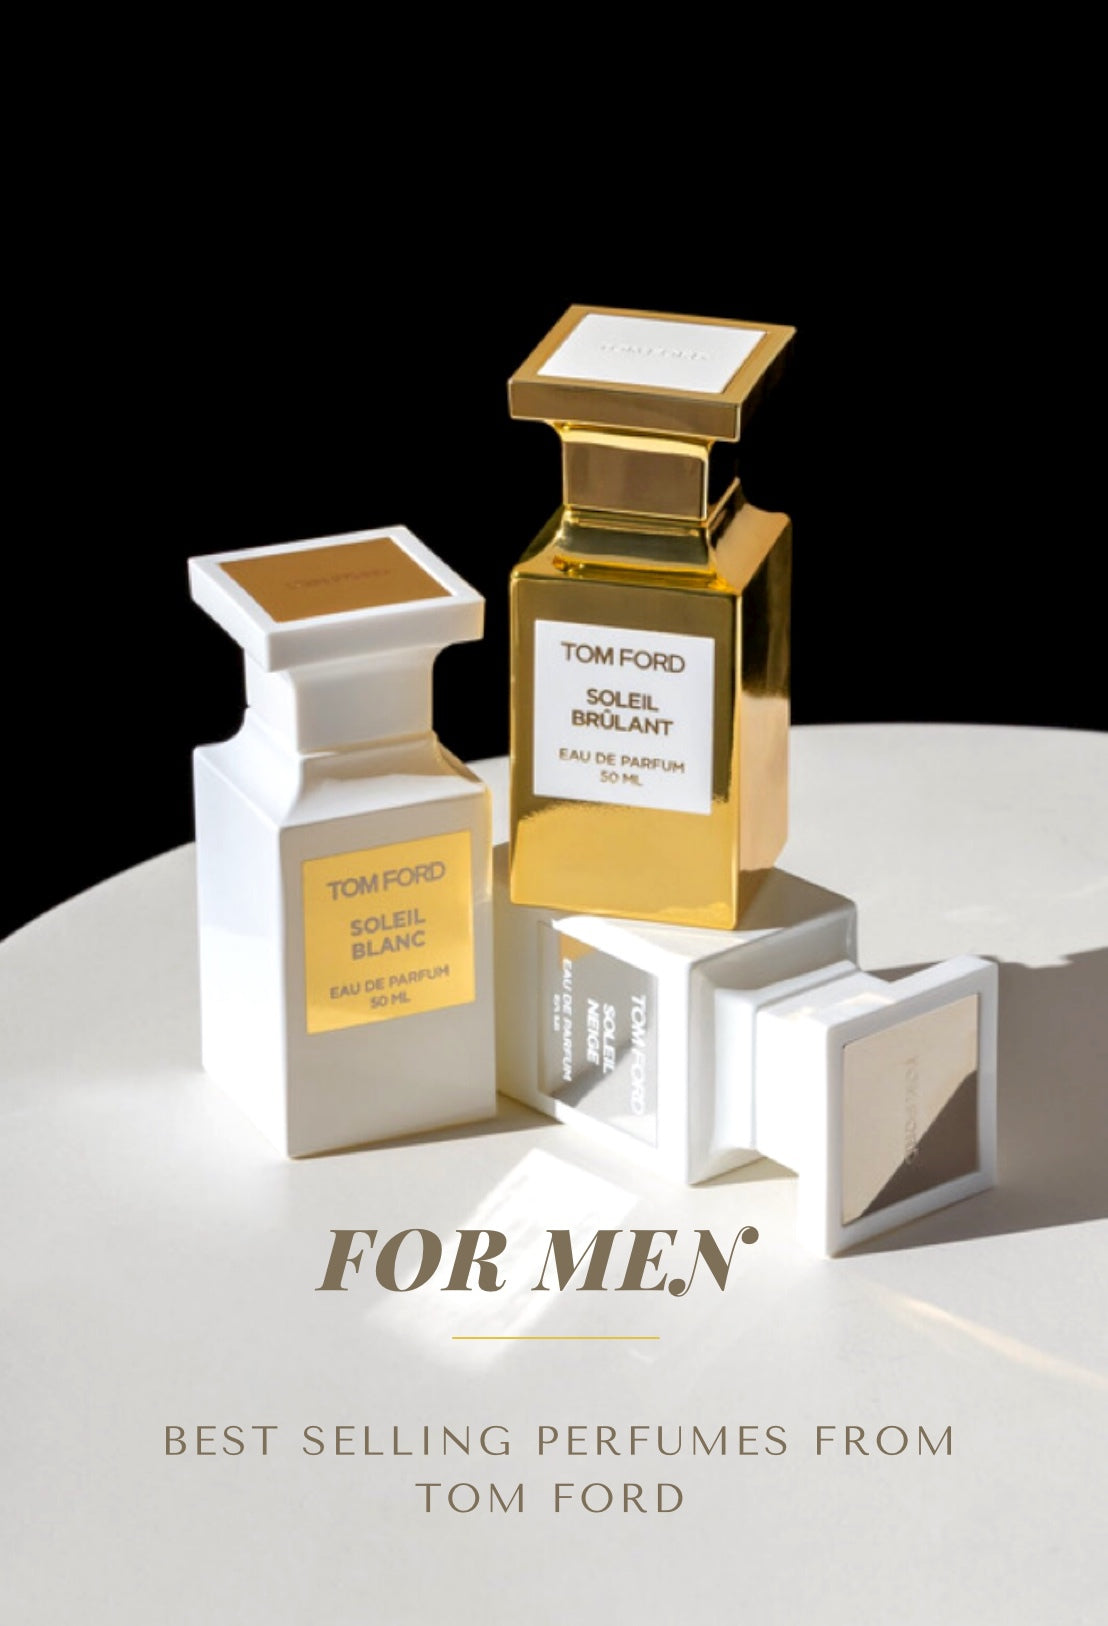 TOM FORD’S BESTSELLING PERFUMES FOR MEN